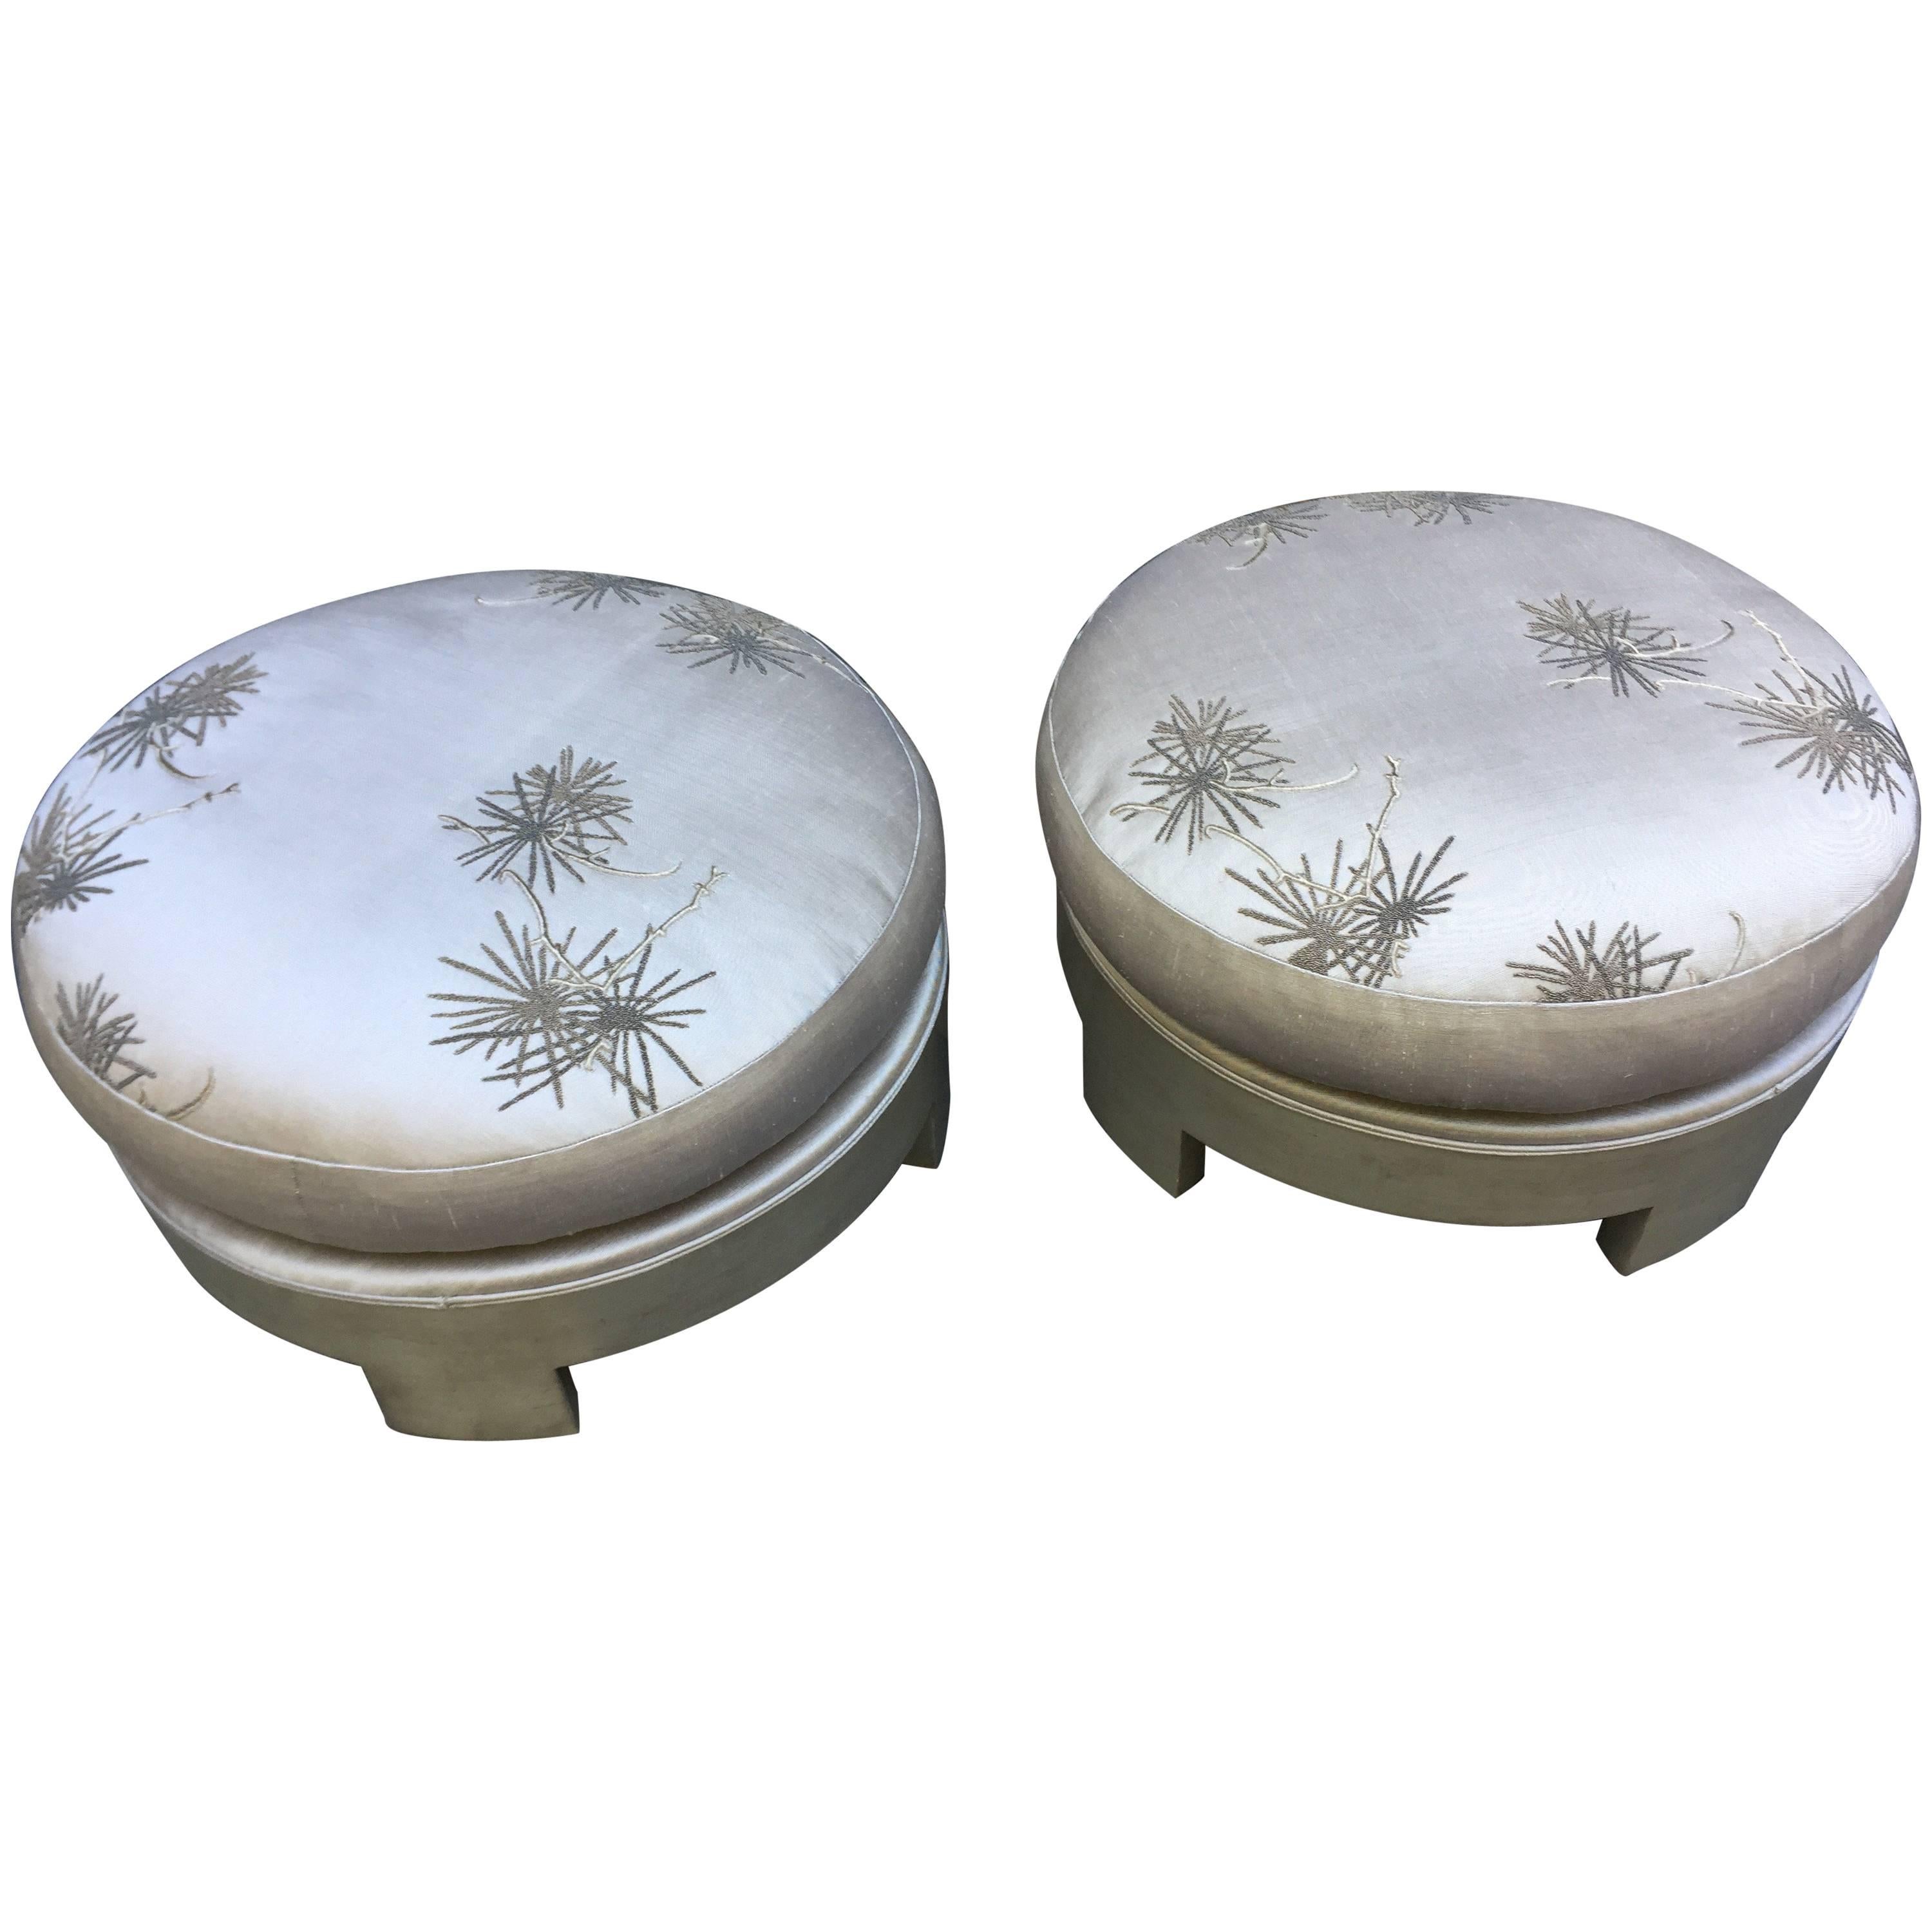 Pair of Stools Floral Contemporary Hand Embroidered White Gold Gilded Wood Base For Sale